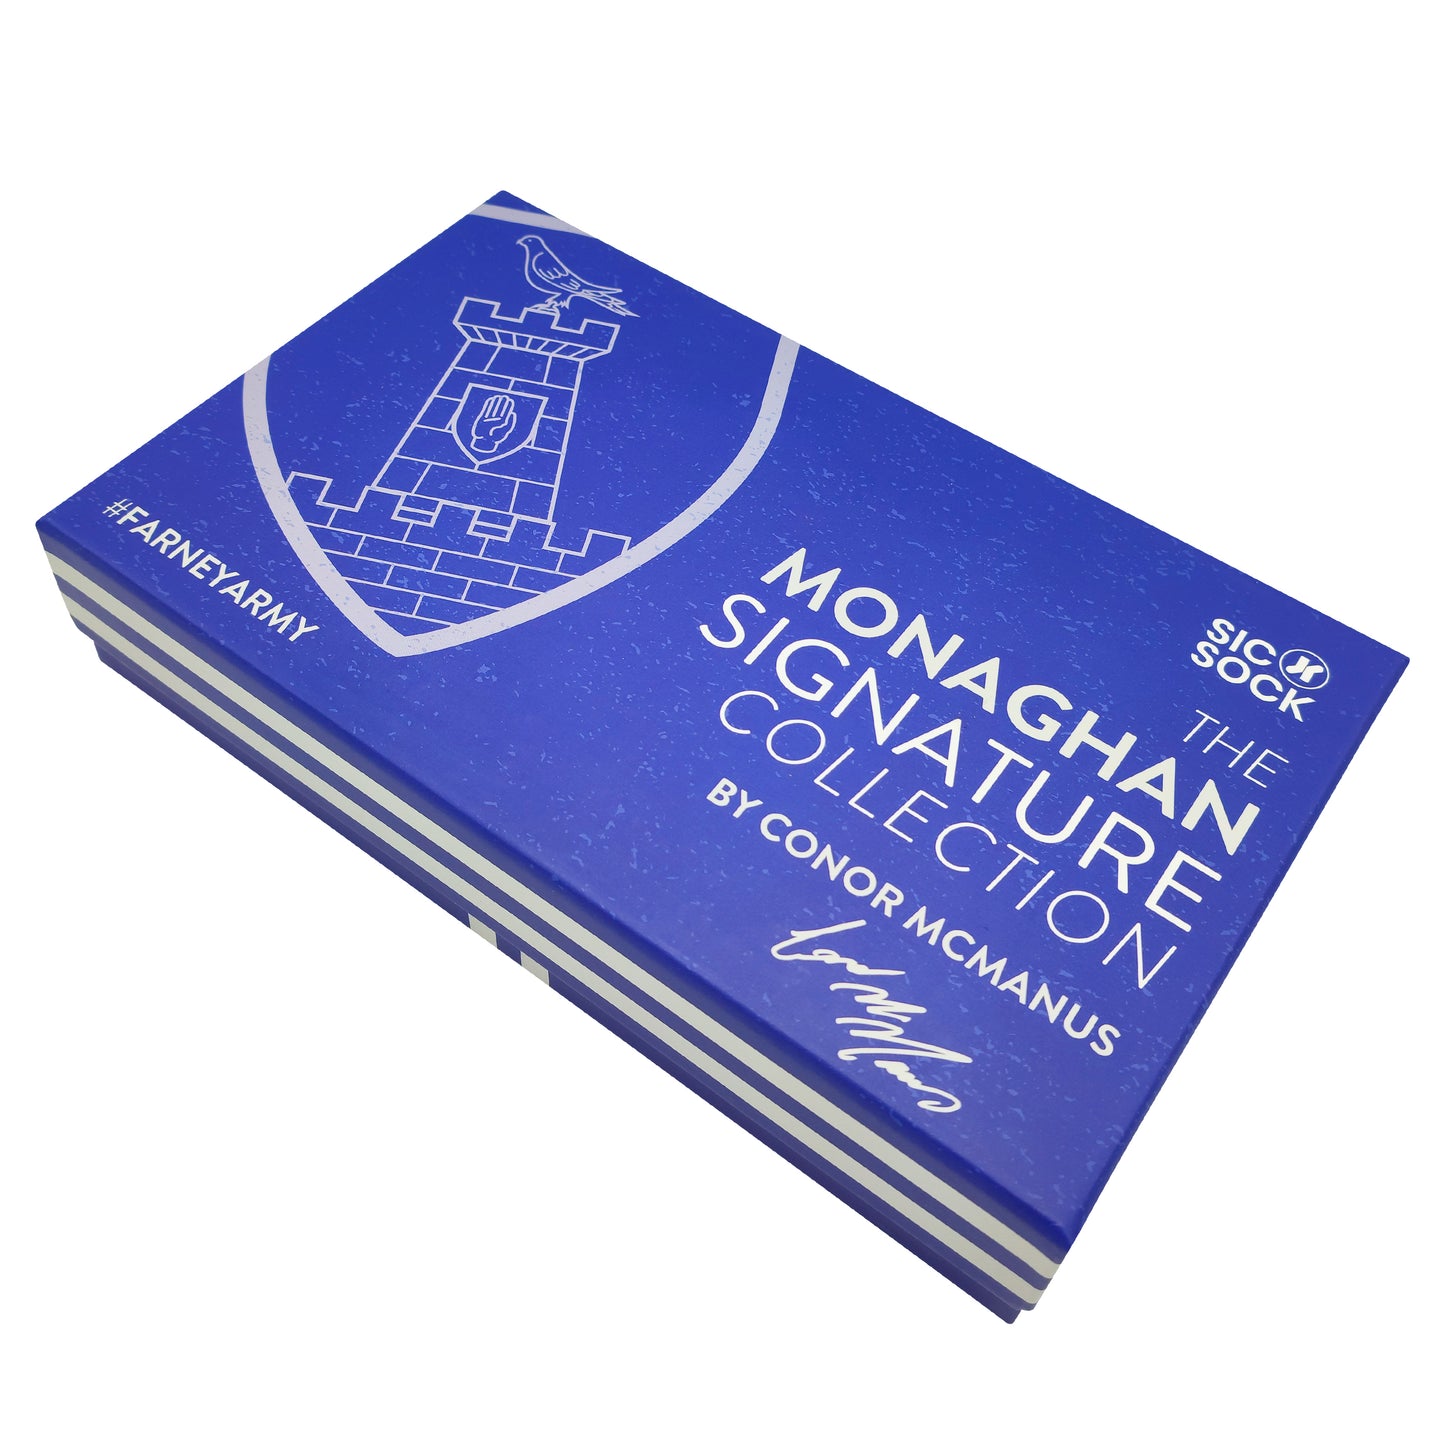 Monaghan Retro Sock Gift Box | Signed By Conor Mcmanus | Size UK 7 - 11